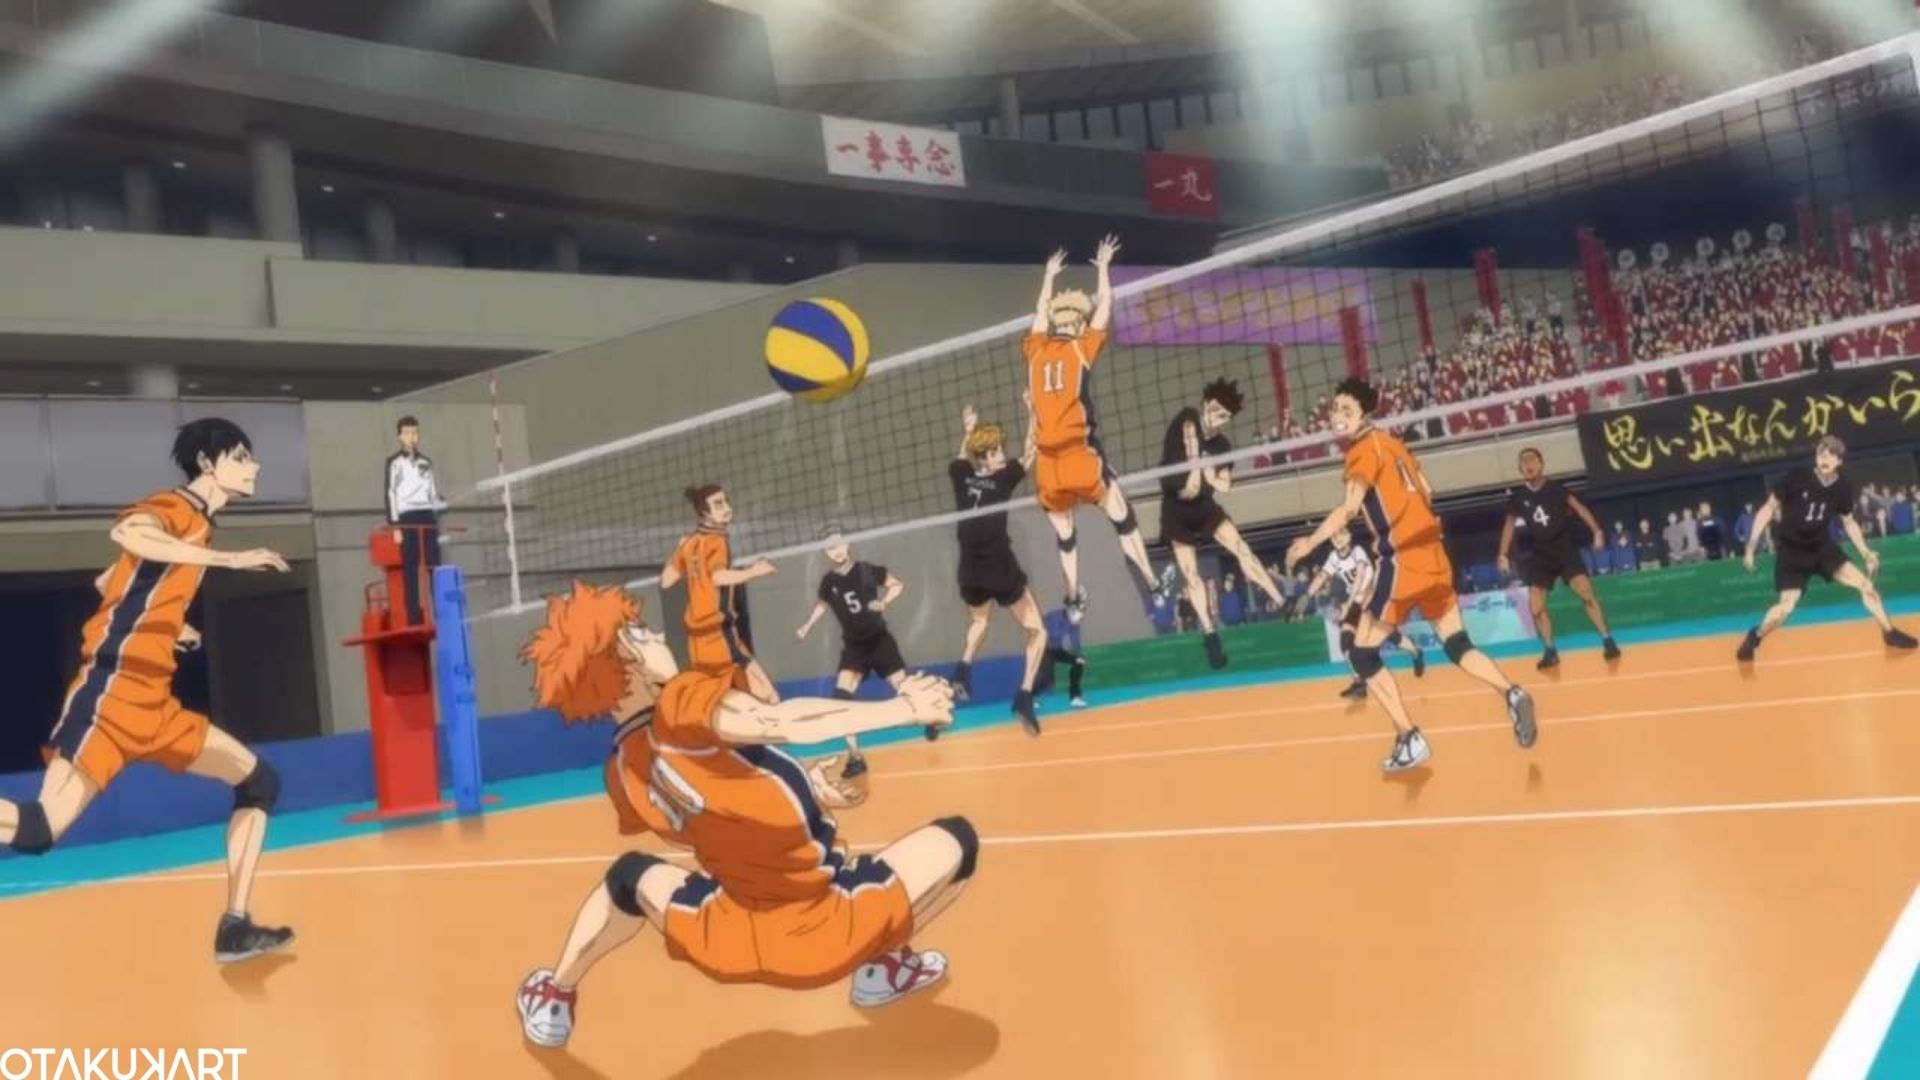 in which episode does Hinata receives the ball in Haikyuu